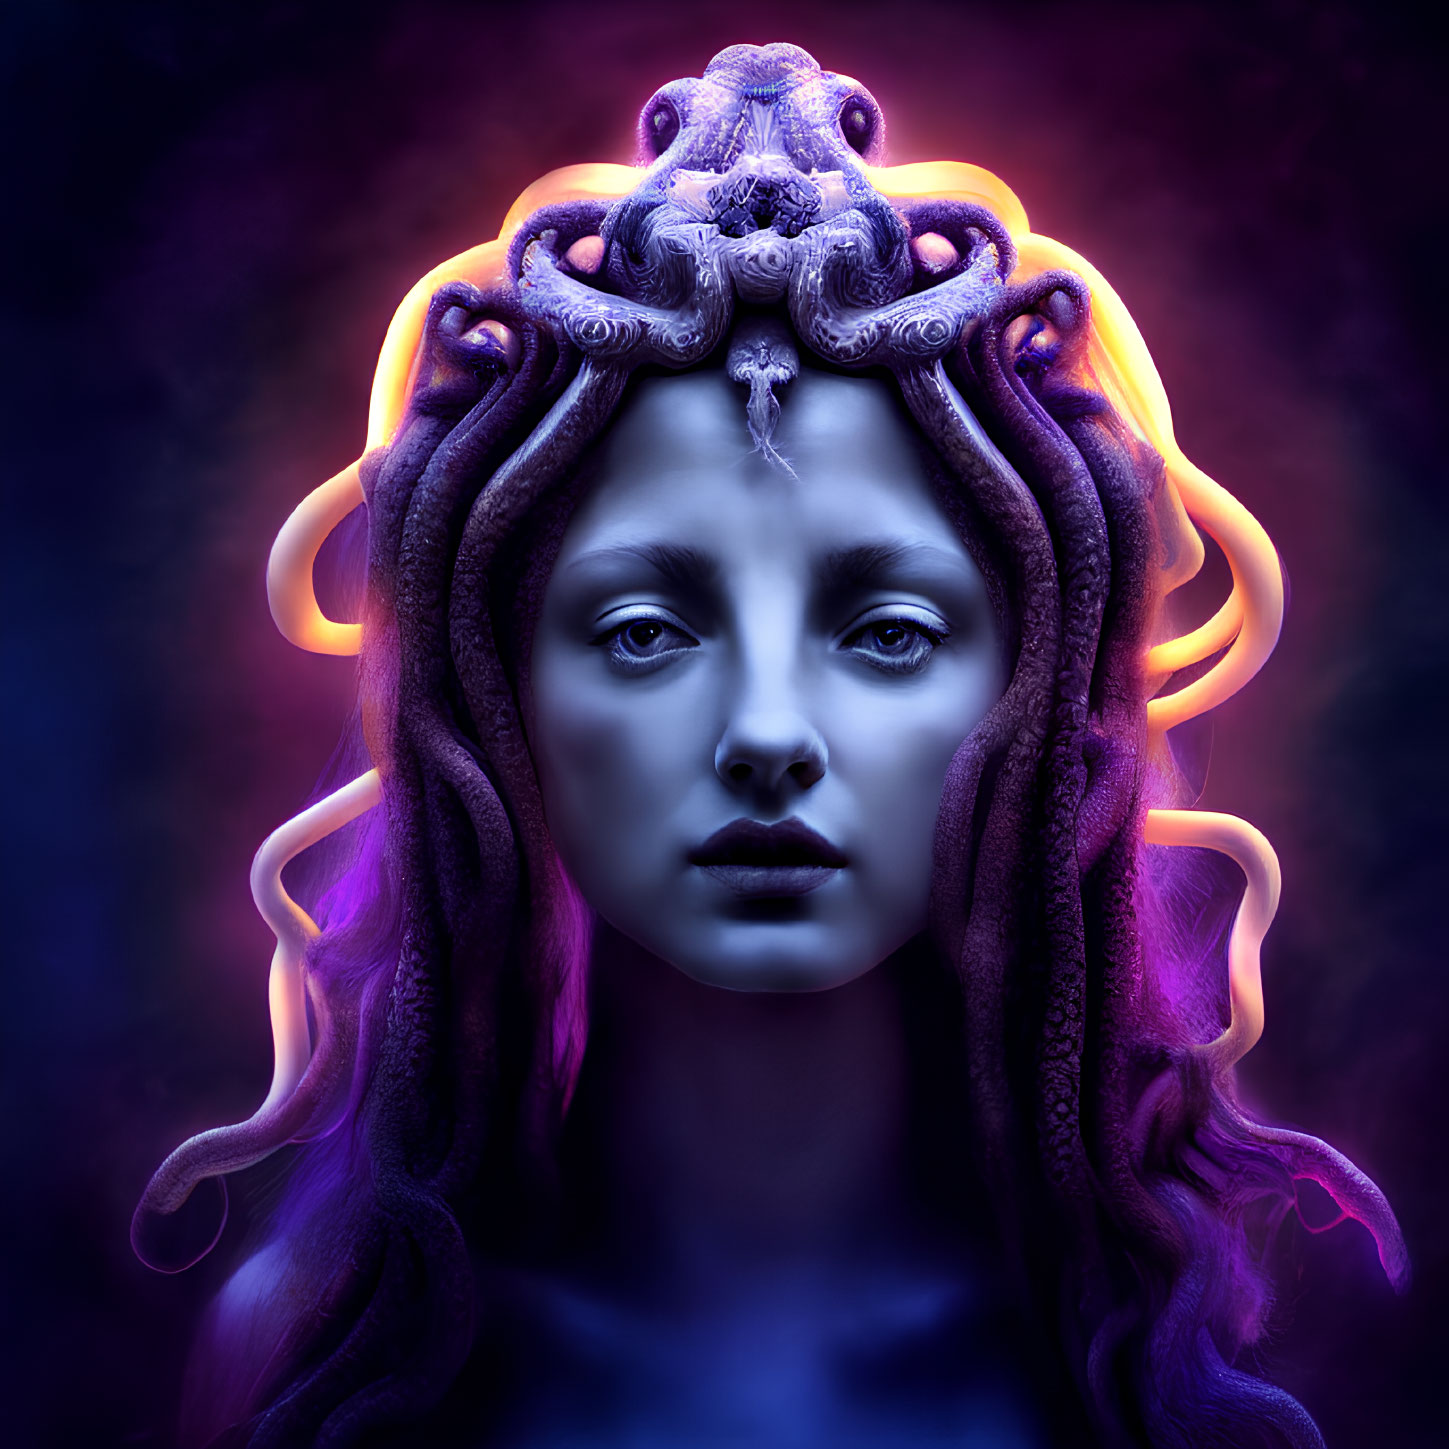 Surreal portrait: woman with purple curls, blue skin, snake on head, violet and blue